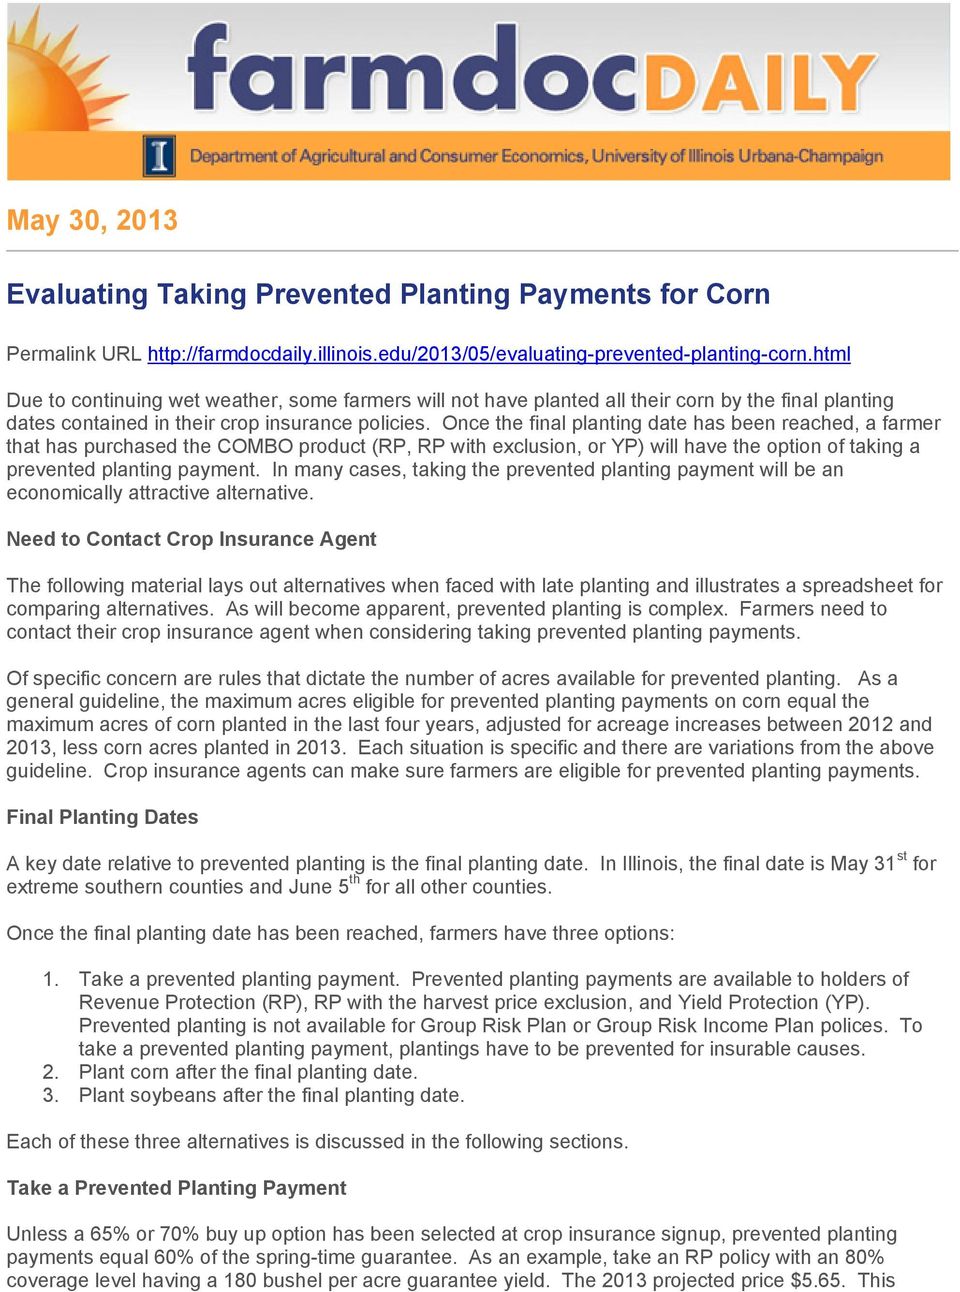 Once the final planting date has been reached, a farmer that has purchased the COMBO product (RP, RP with exclusion, or YP) will have the option of taking a prevented planting payment.